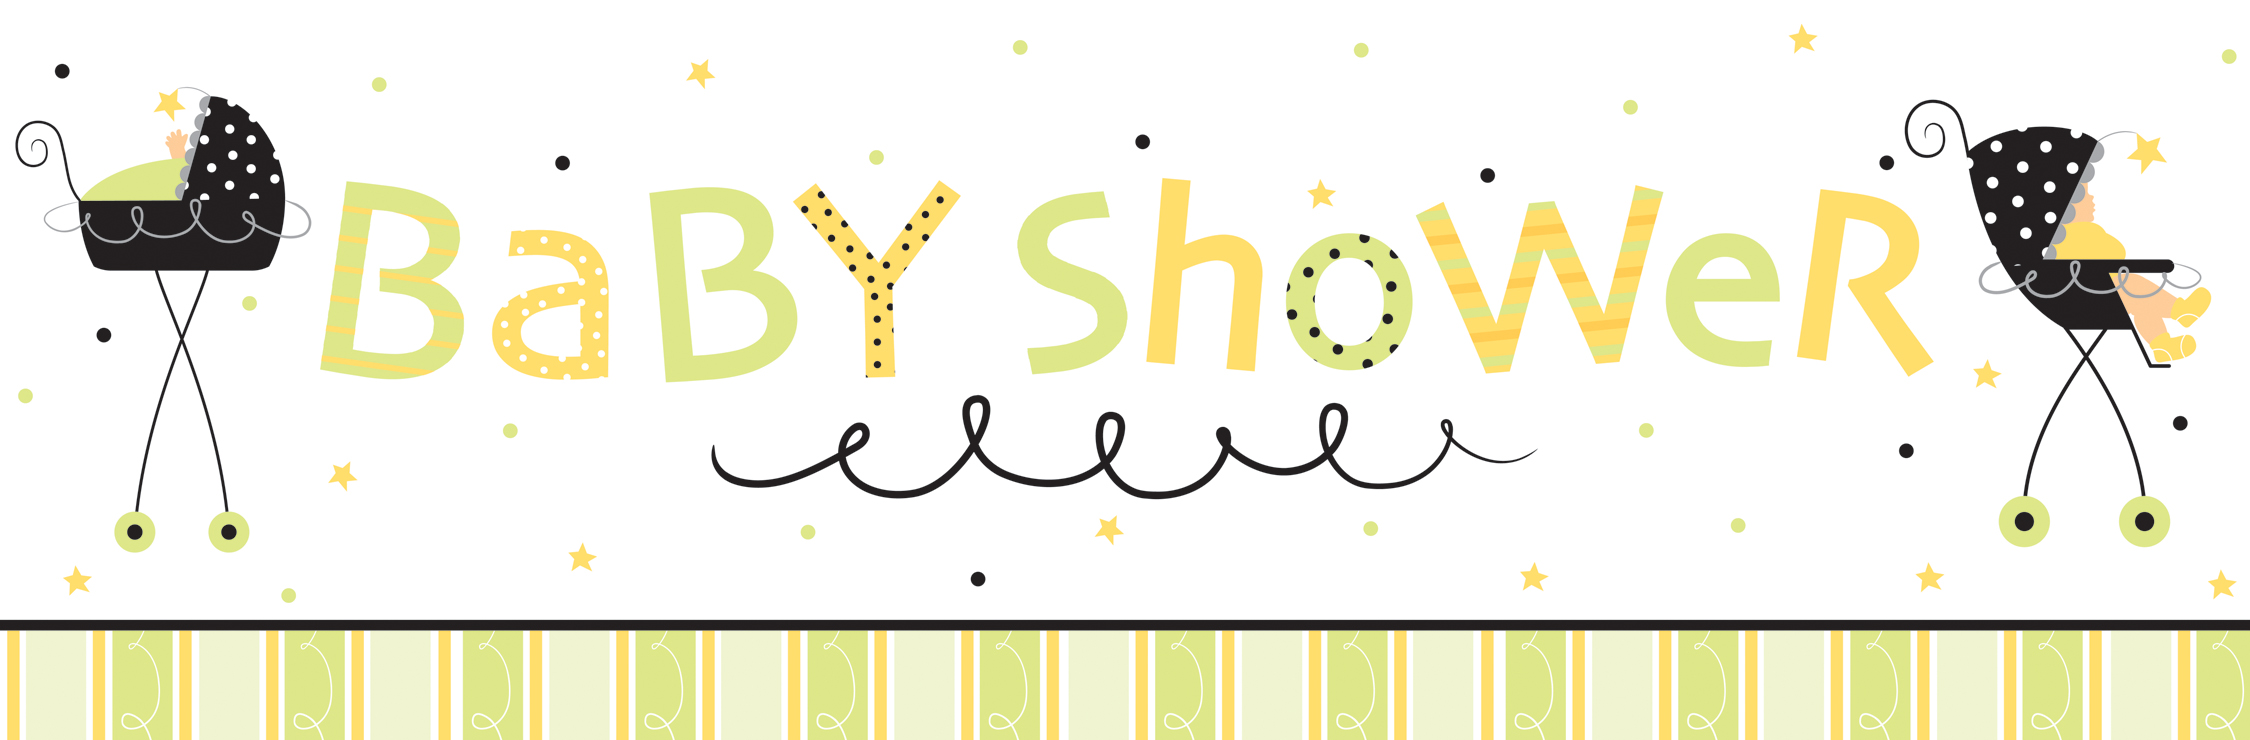 Full Size of Baby Shower:89+ Indulging Baby Shower Banner Picture Inspirations Baby Shower Snacks Baby Shower Giveaways Baby Shower Ideas Baby Shower Hairstyles Baby Shower Napkins